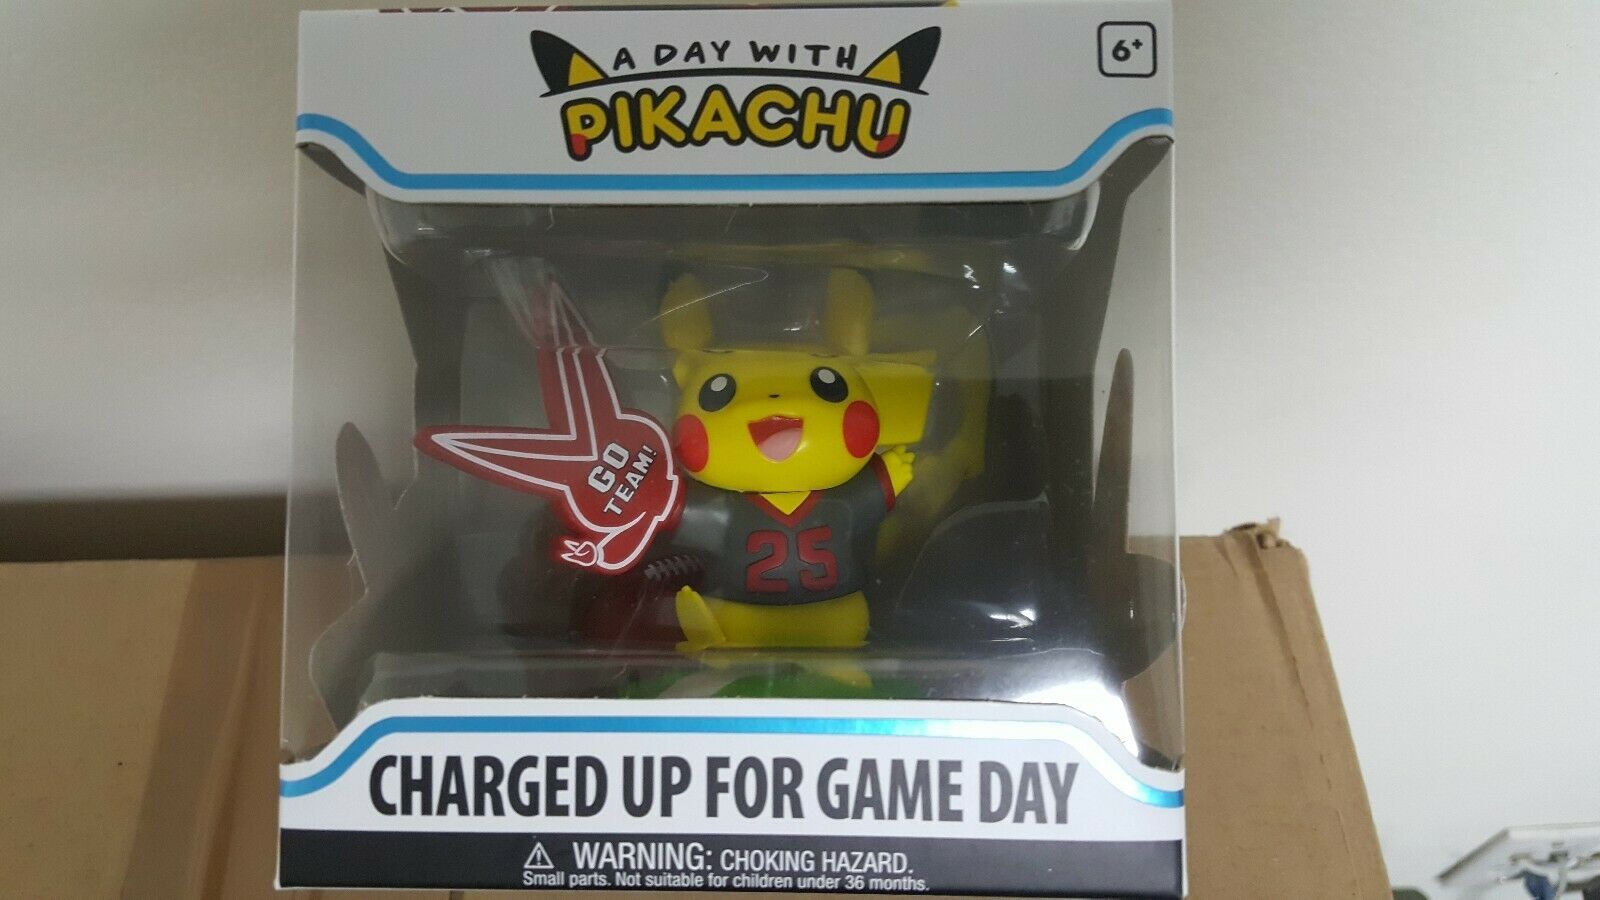 Funko Pokemon A DAY WITH PIKACHU - Charged Up For Game Day BRAND NEW